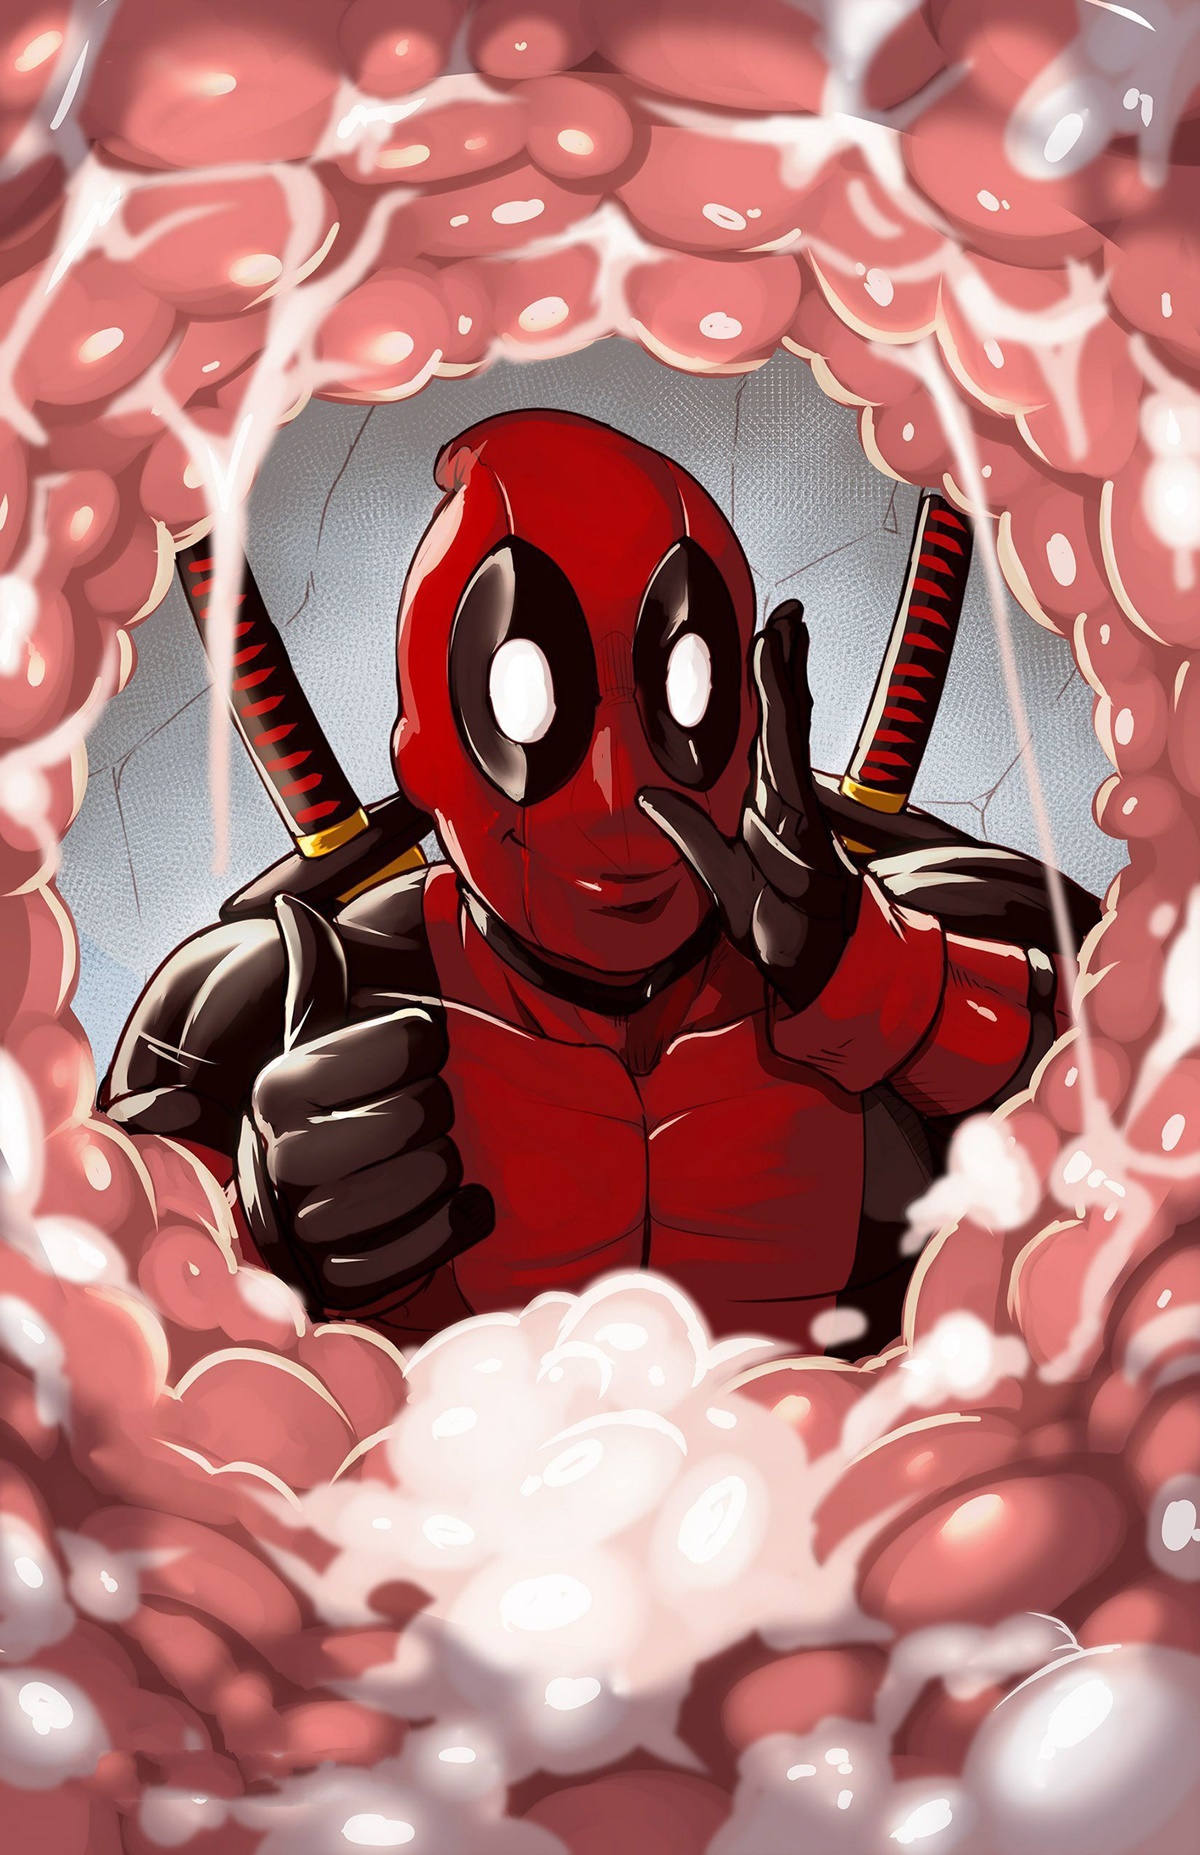 Deadpool Thinking with Portals